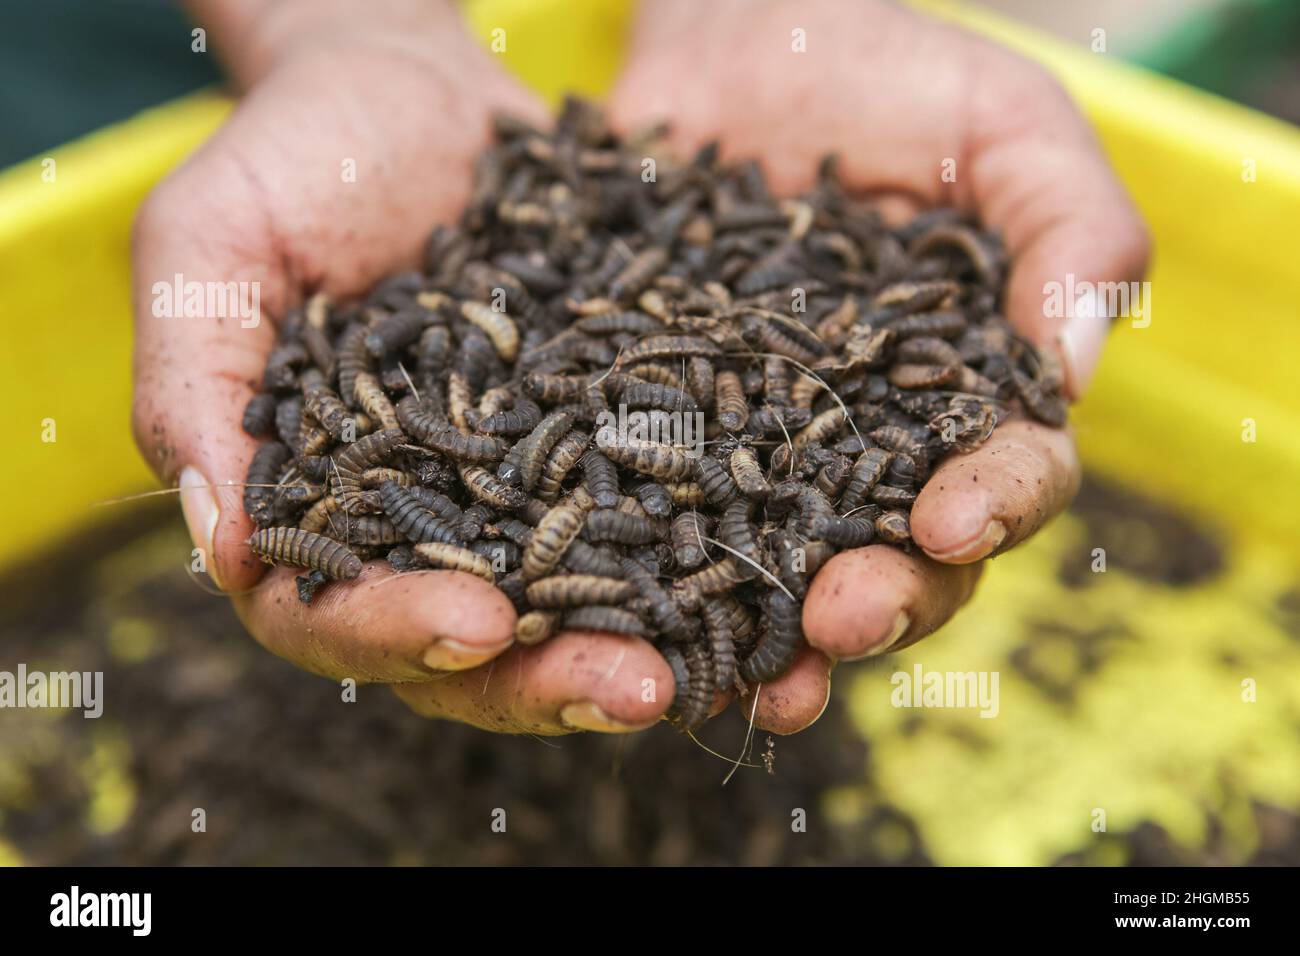 Fresh Larvae and Pupa of Black Soldier fly, at the farm in Lower Kabete. Zihanga (meaning Zero Hunger) is a waste recycling farm of organic waste such as animal waste from slaughterhouses and market food waste that feeds the waste to Black Soldier Flies (Scientific name: Hermetia illucens) in turn producing animal protein and rich organic compost. The farm employs 6 young men and offers trainings for farmers about Black Soldier Fly farming. Stock Photo